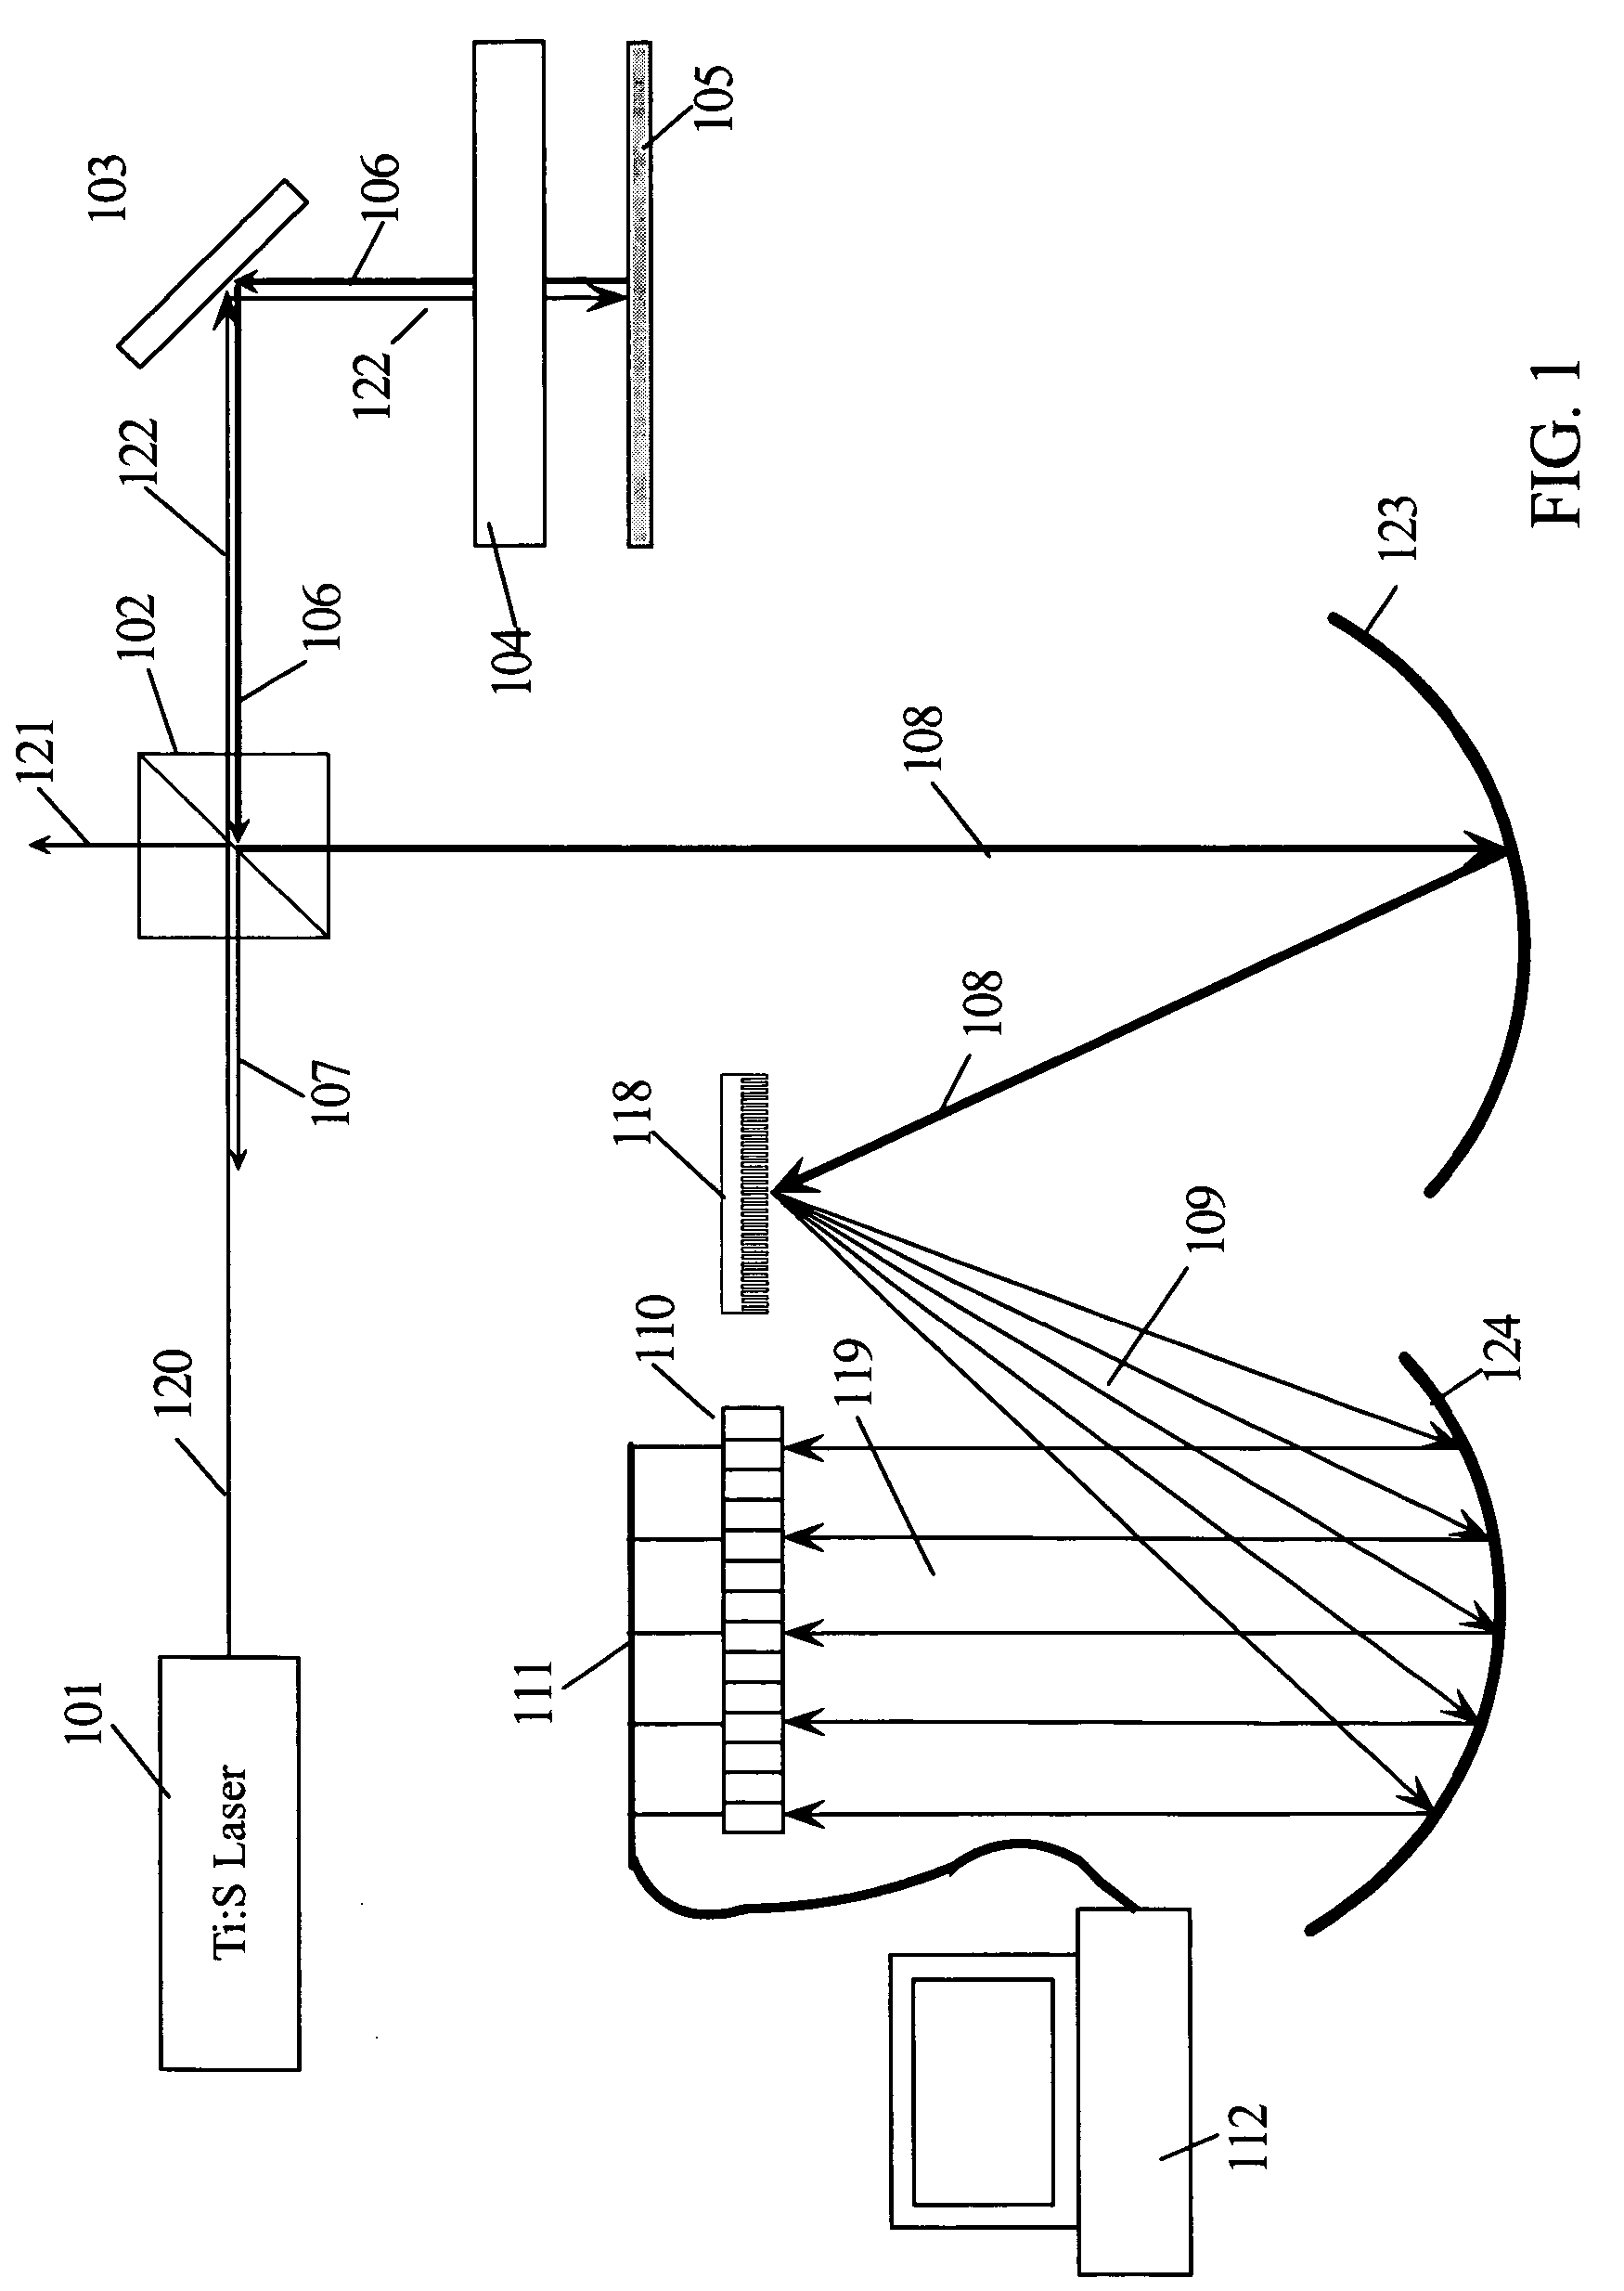 Broadband cavity spectrometer apparatus and method for determining the path length of an optical structure